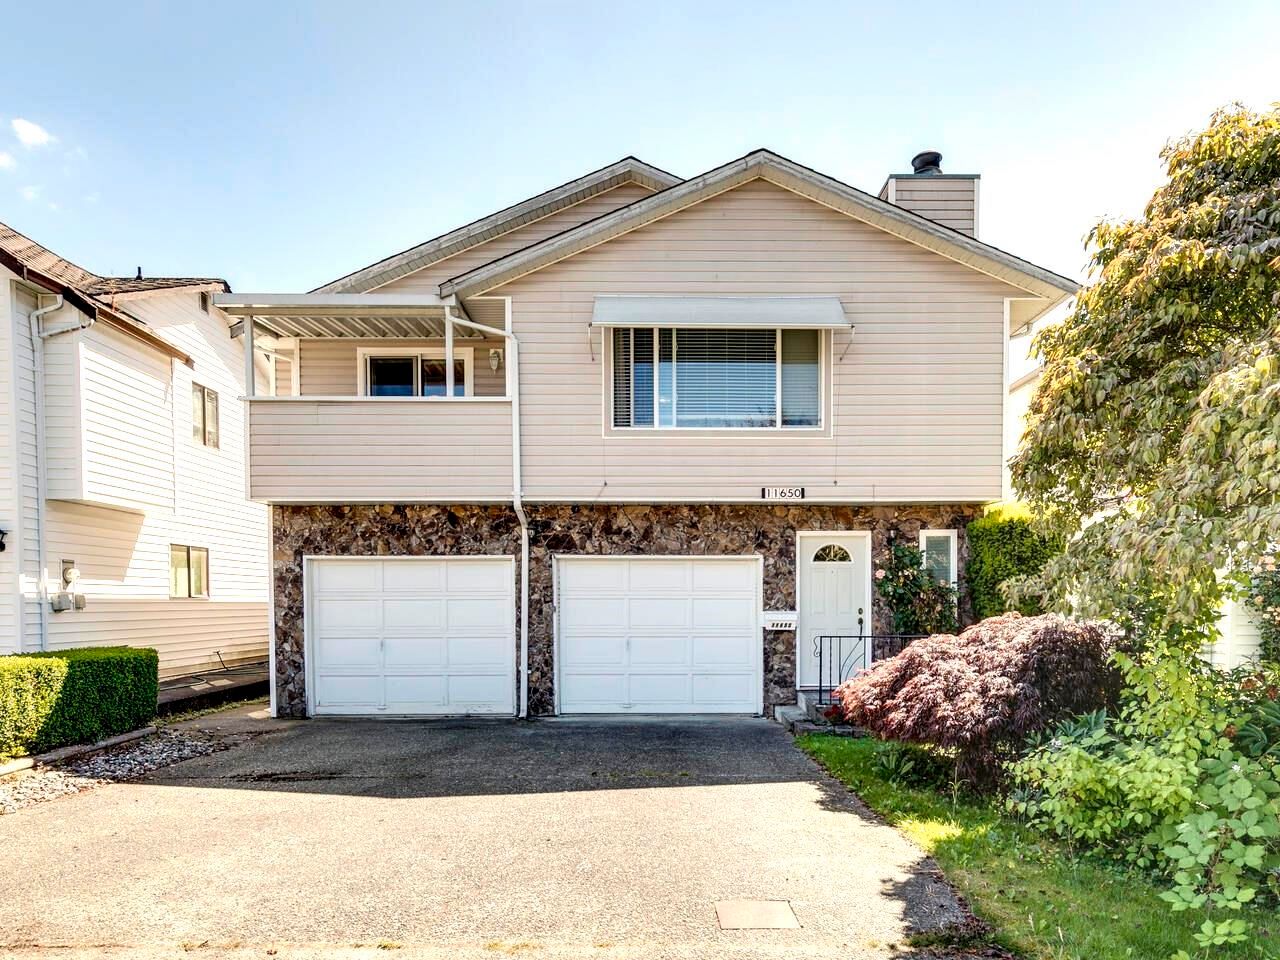 Open House on Sunday, October 30, 2022 2:00PM - 4:00PM
Great home with a great setting and a great South-West Maple Ridge location.  This has to be one of the best buys in Maple Ridge.  See for yourself.  You'll be very glad you did!